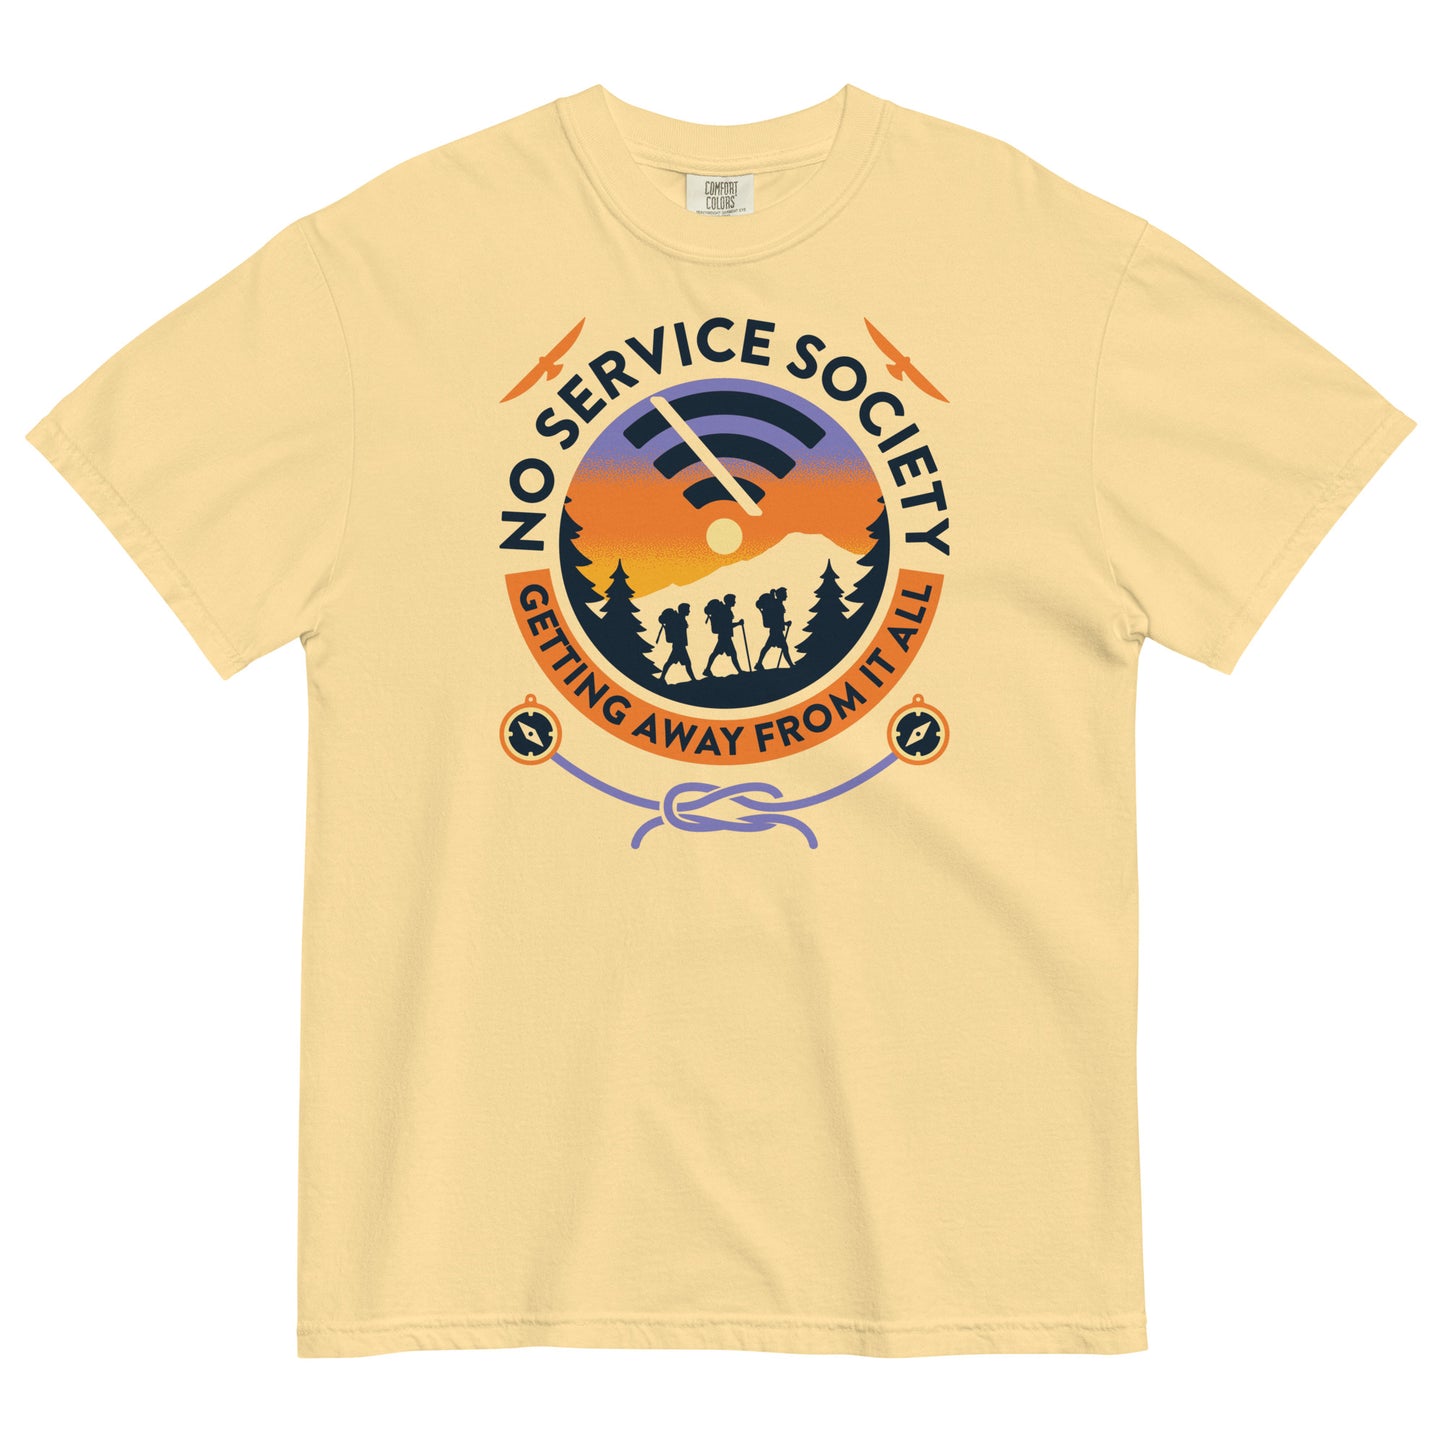 No Service Society Men's Relaxed Fit Tee